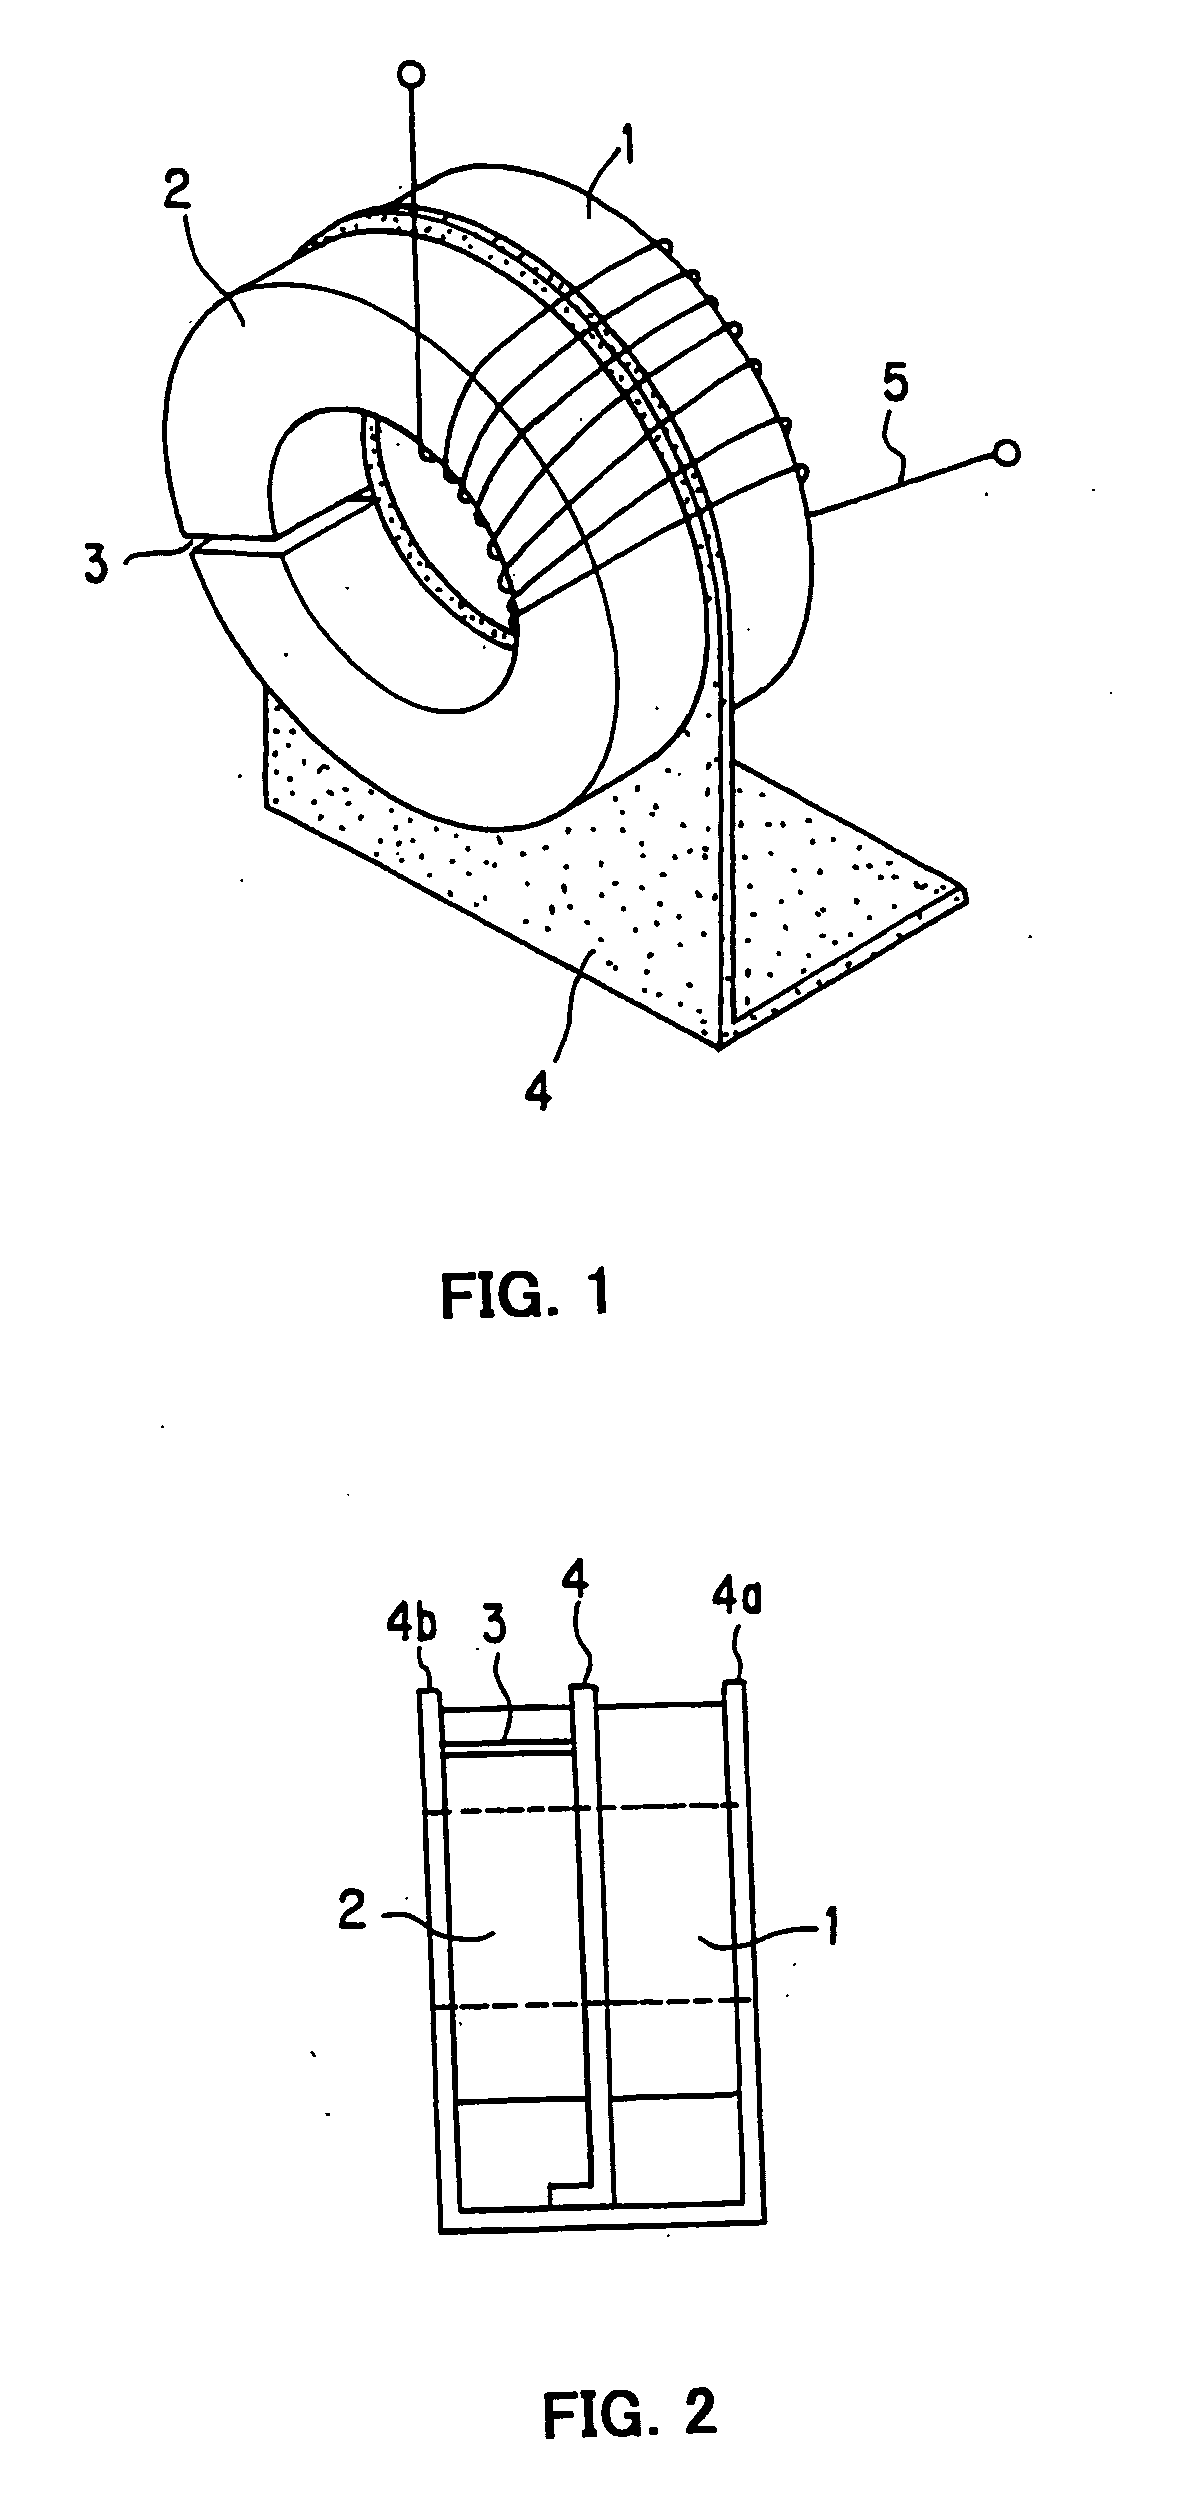 Composite core nonlinear reactor and induction power receiving circuit